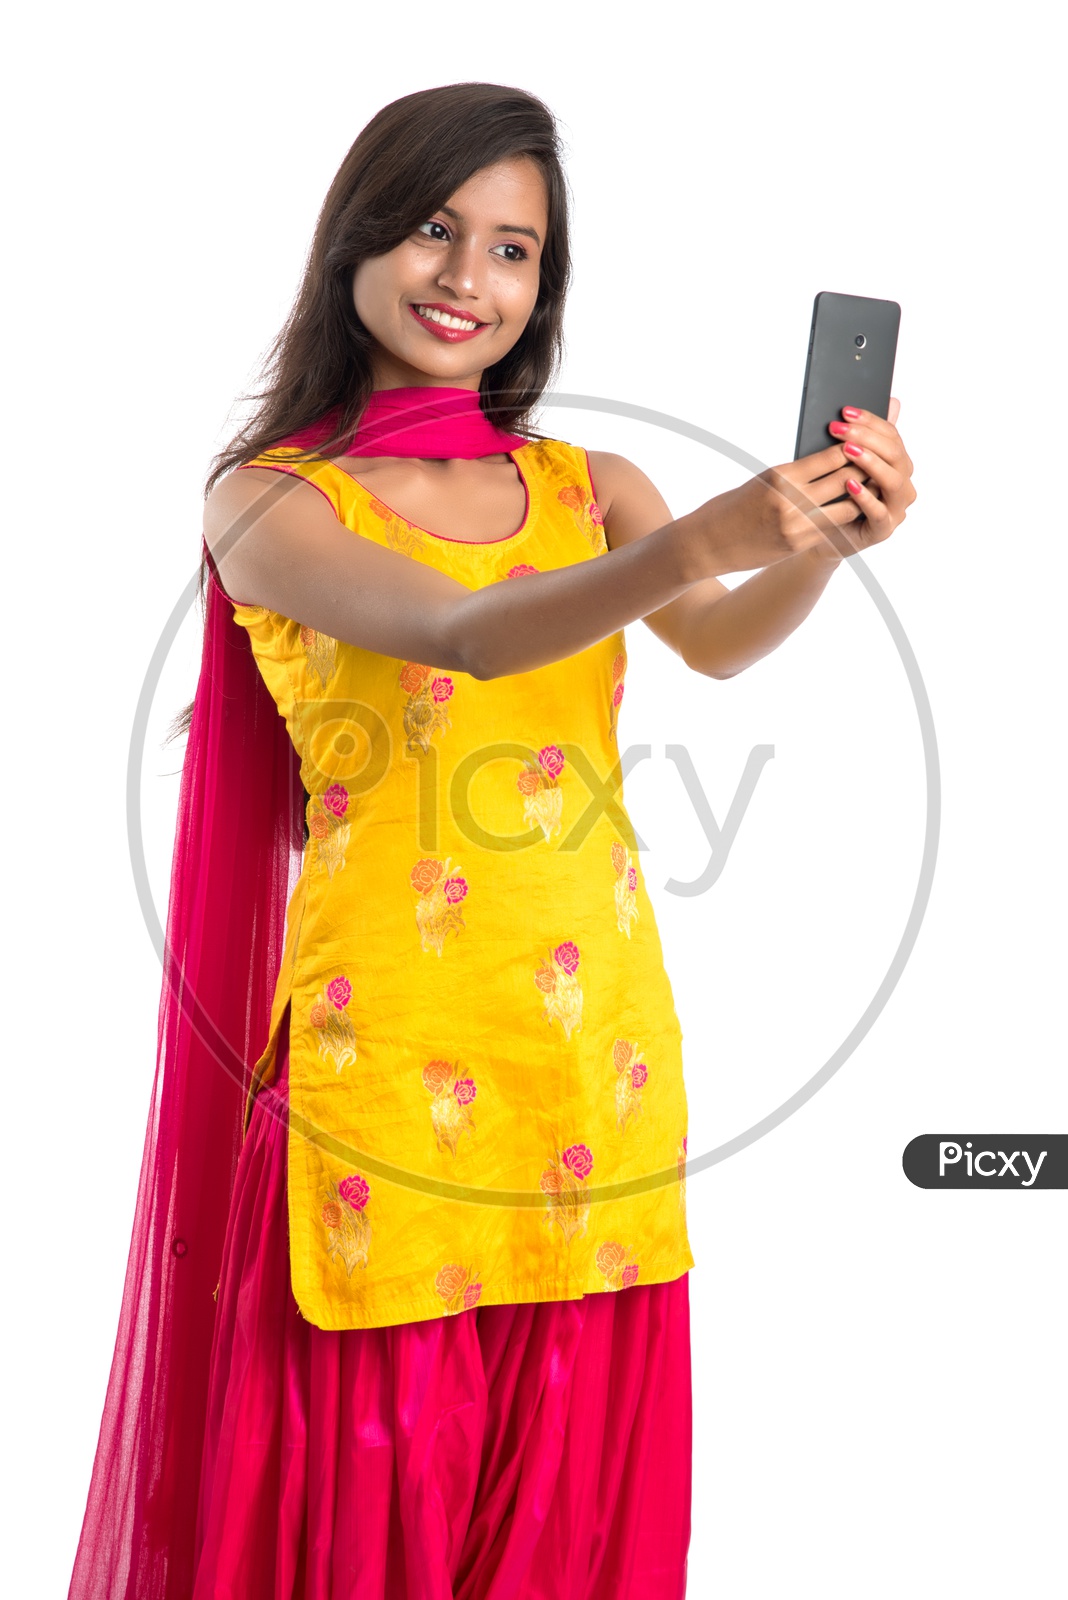 Young Indian Girl or Woman Taking Selfie With a Smartphone  On an Isolated White Background